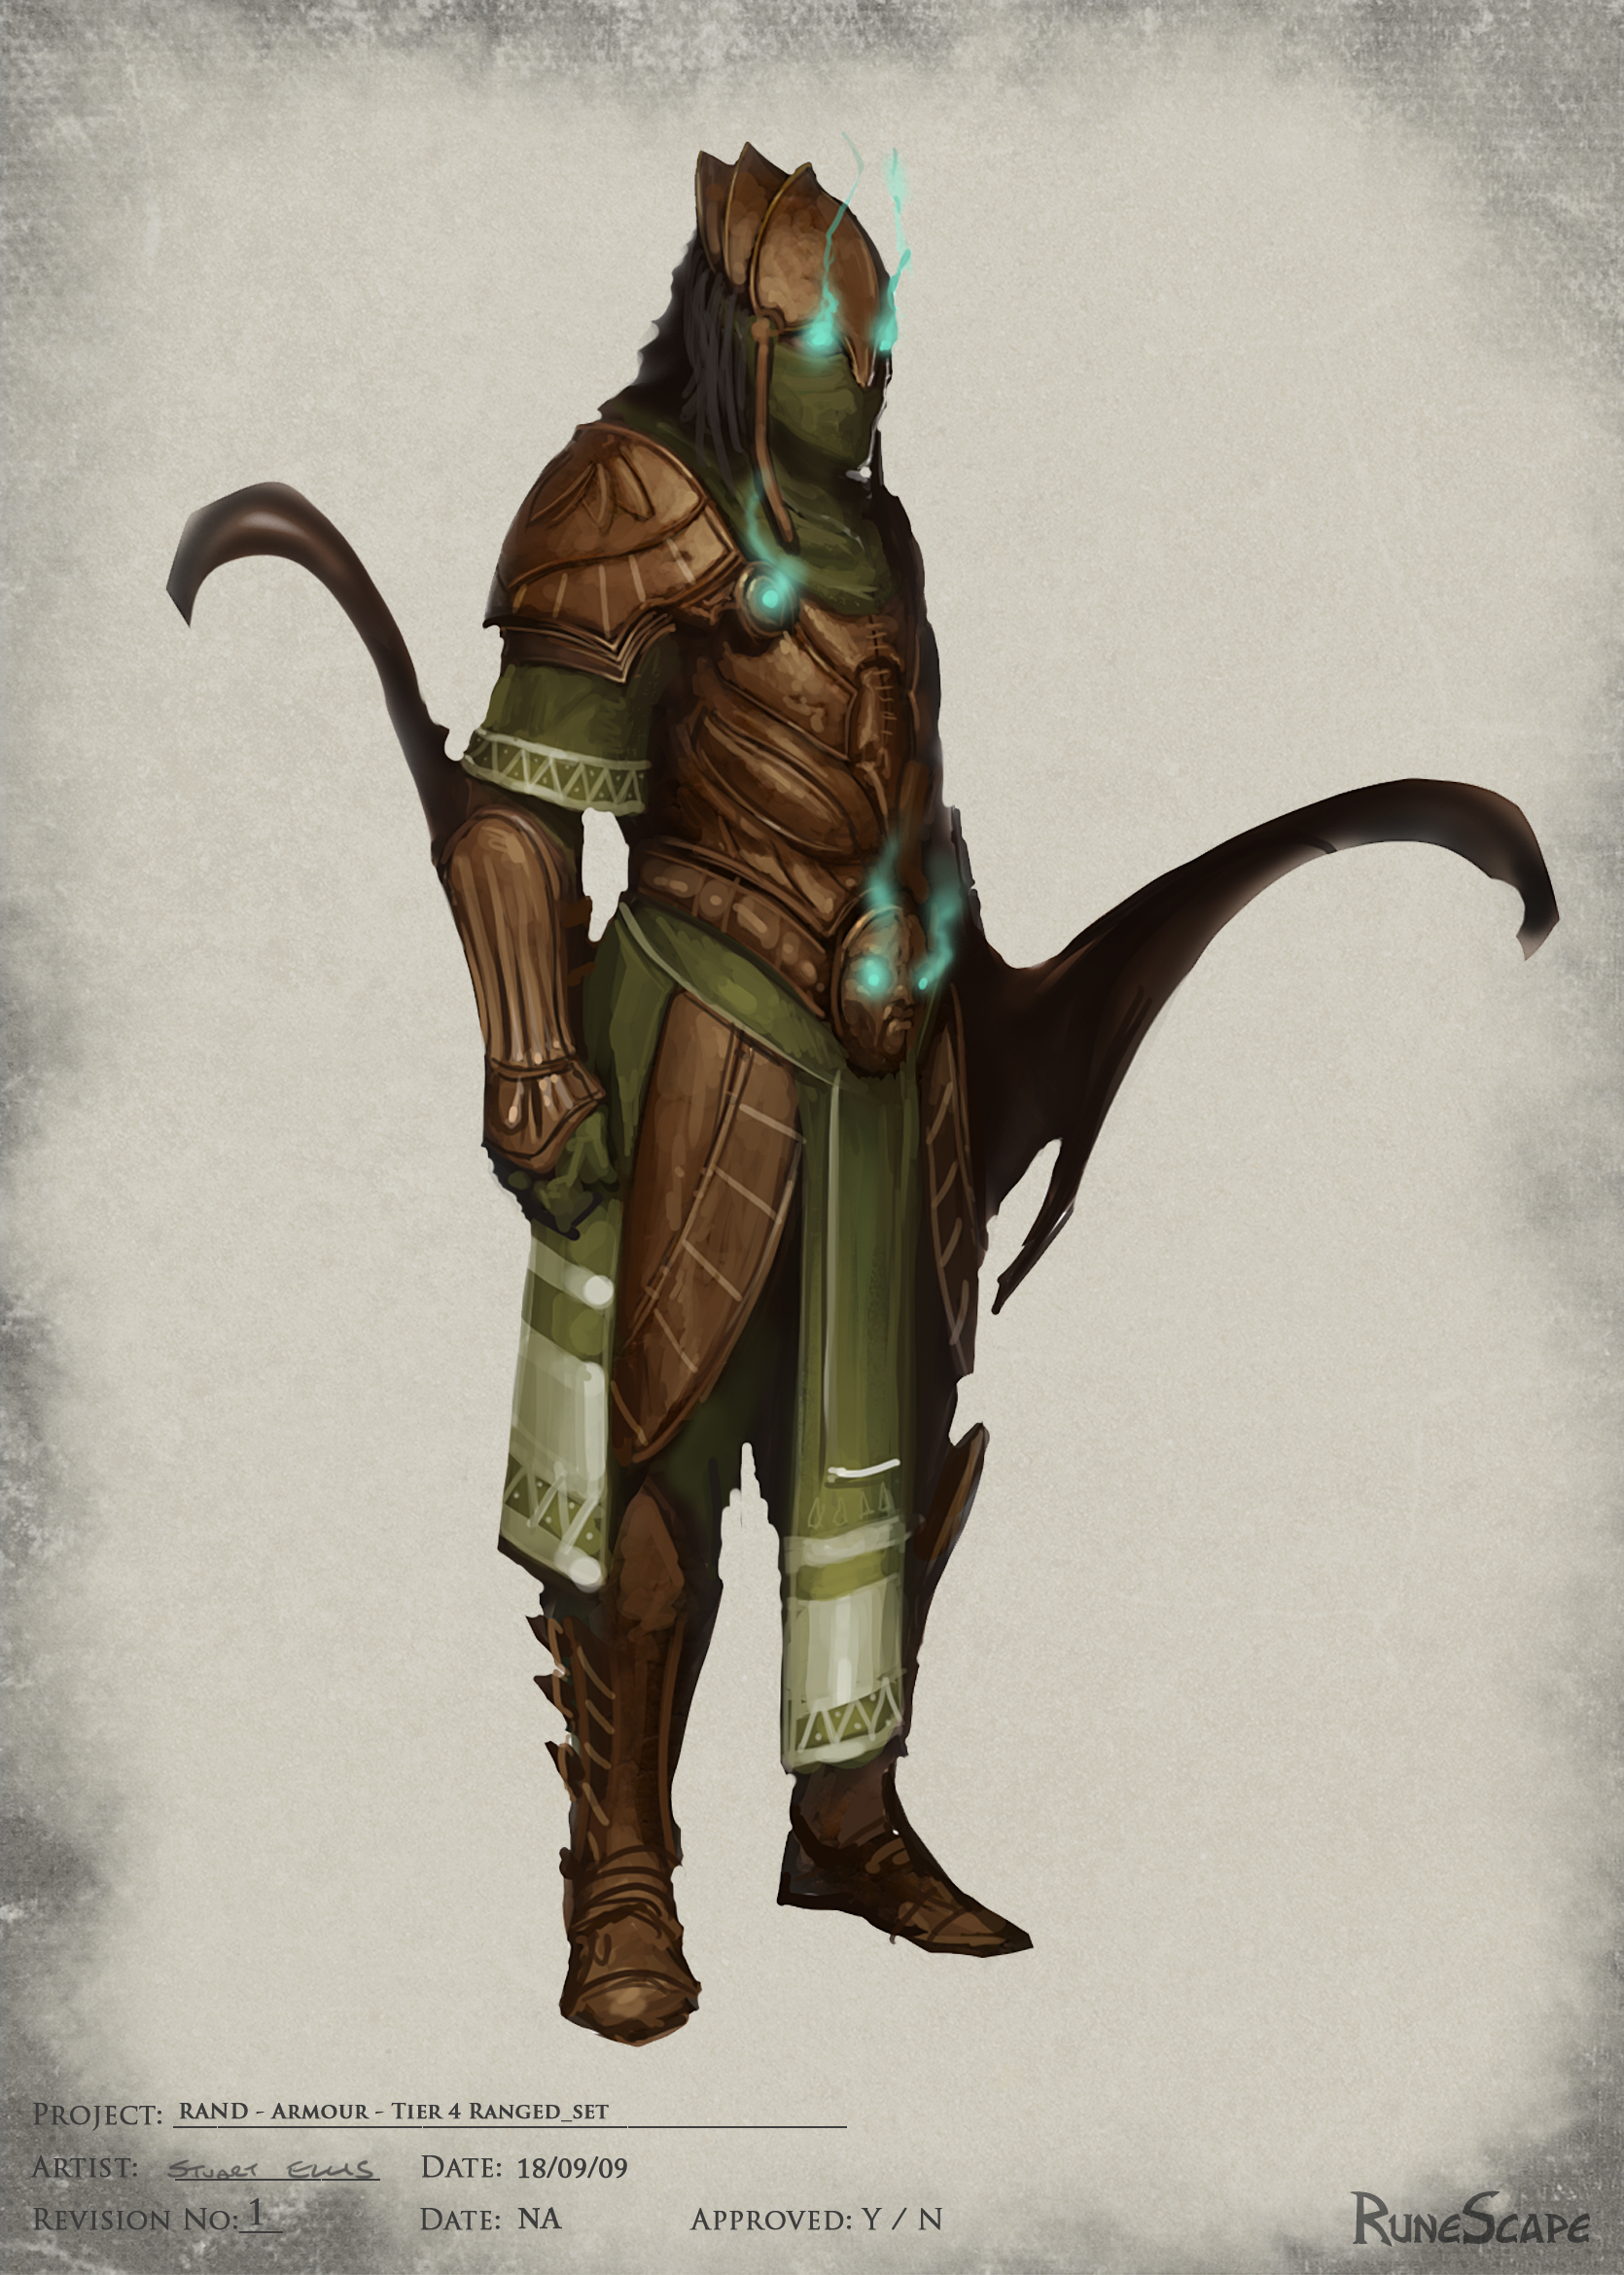 http://images2.wikia.nocookie.net/__cb20111227175261/runescape/images/f/fe/Sagittarian_armour_concept.jpg